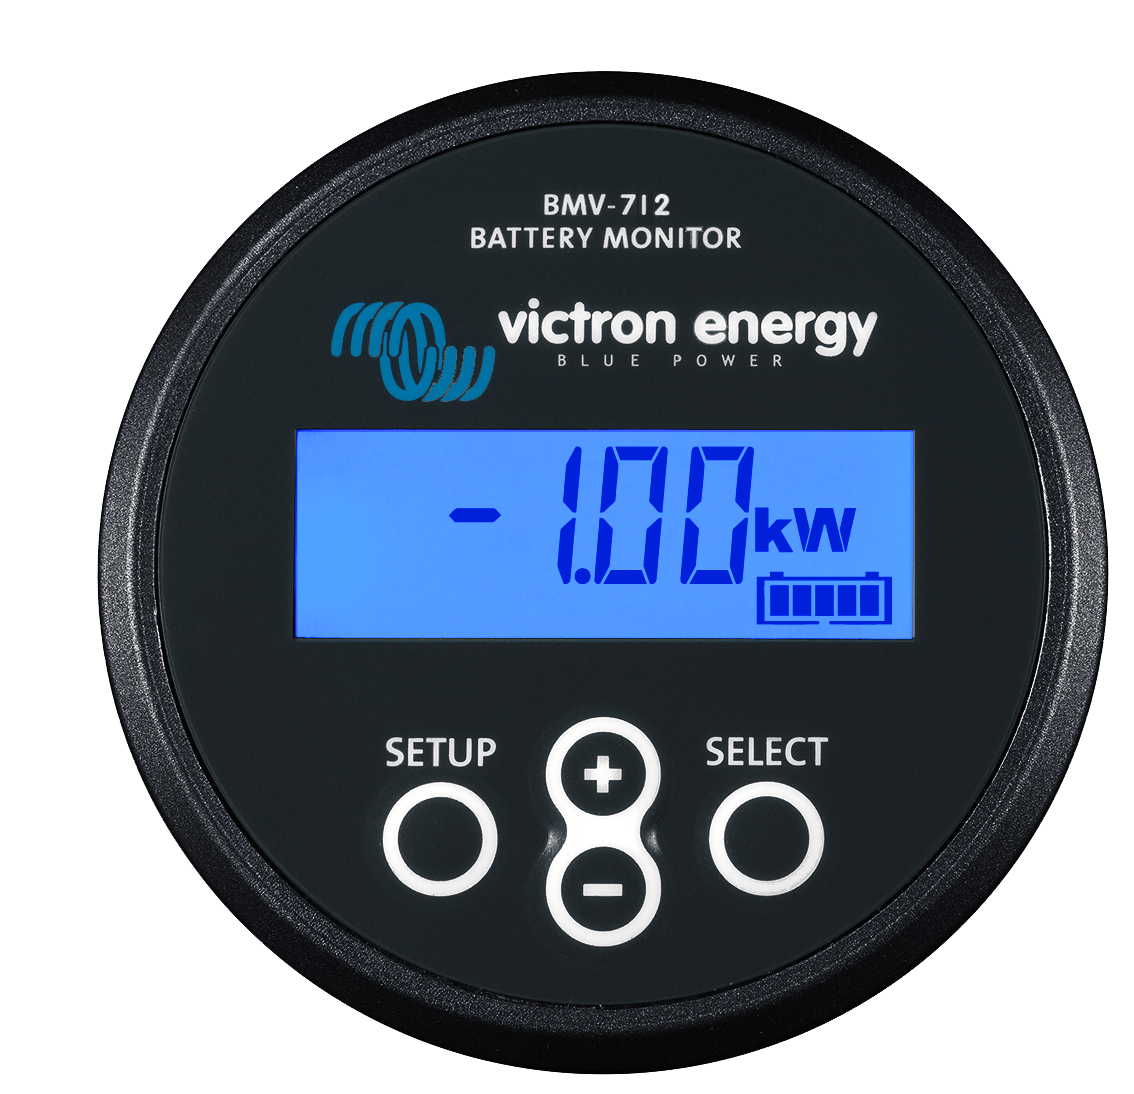 Does the BMV-712 have a temperature reading feature?